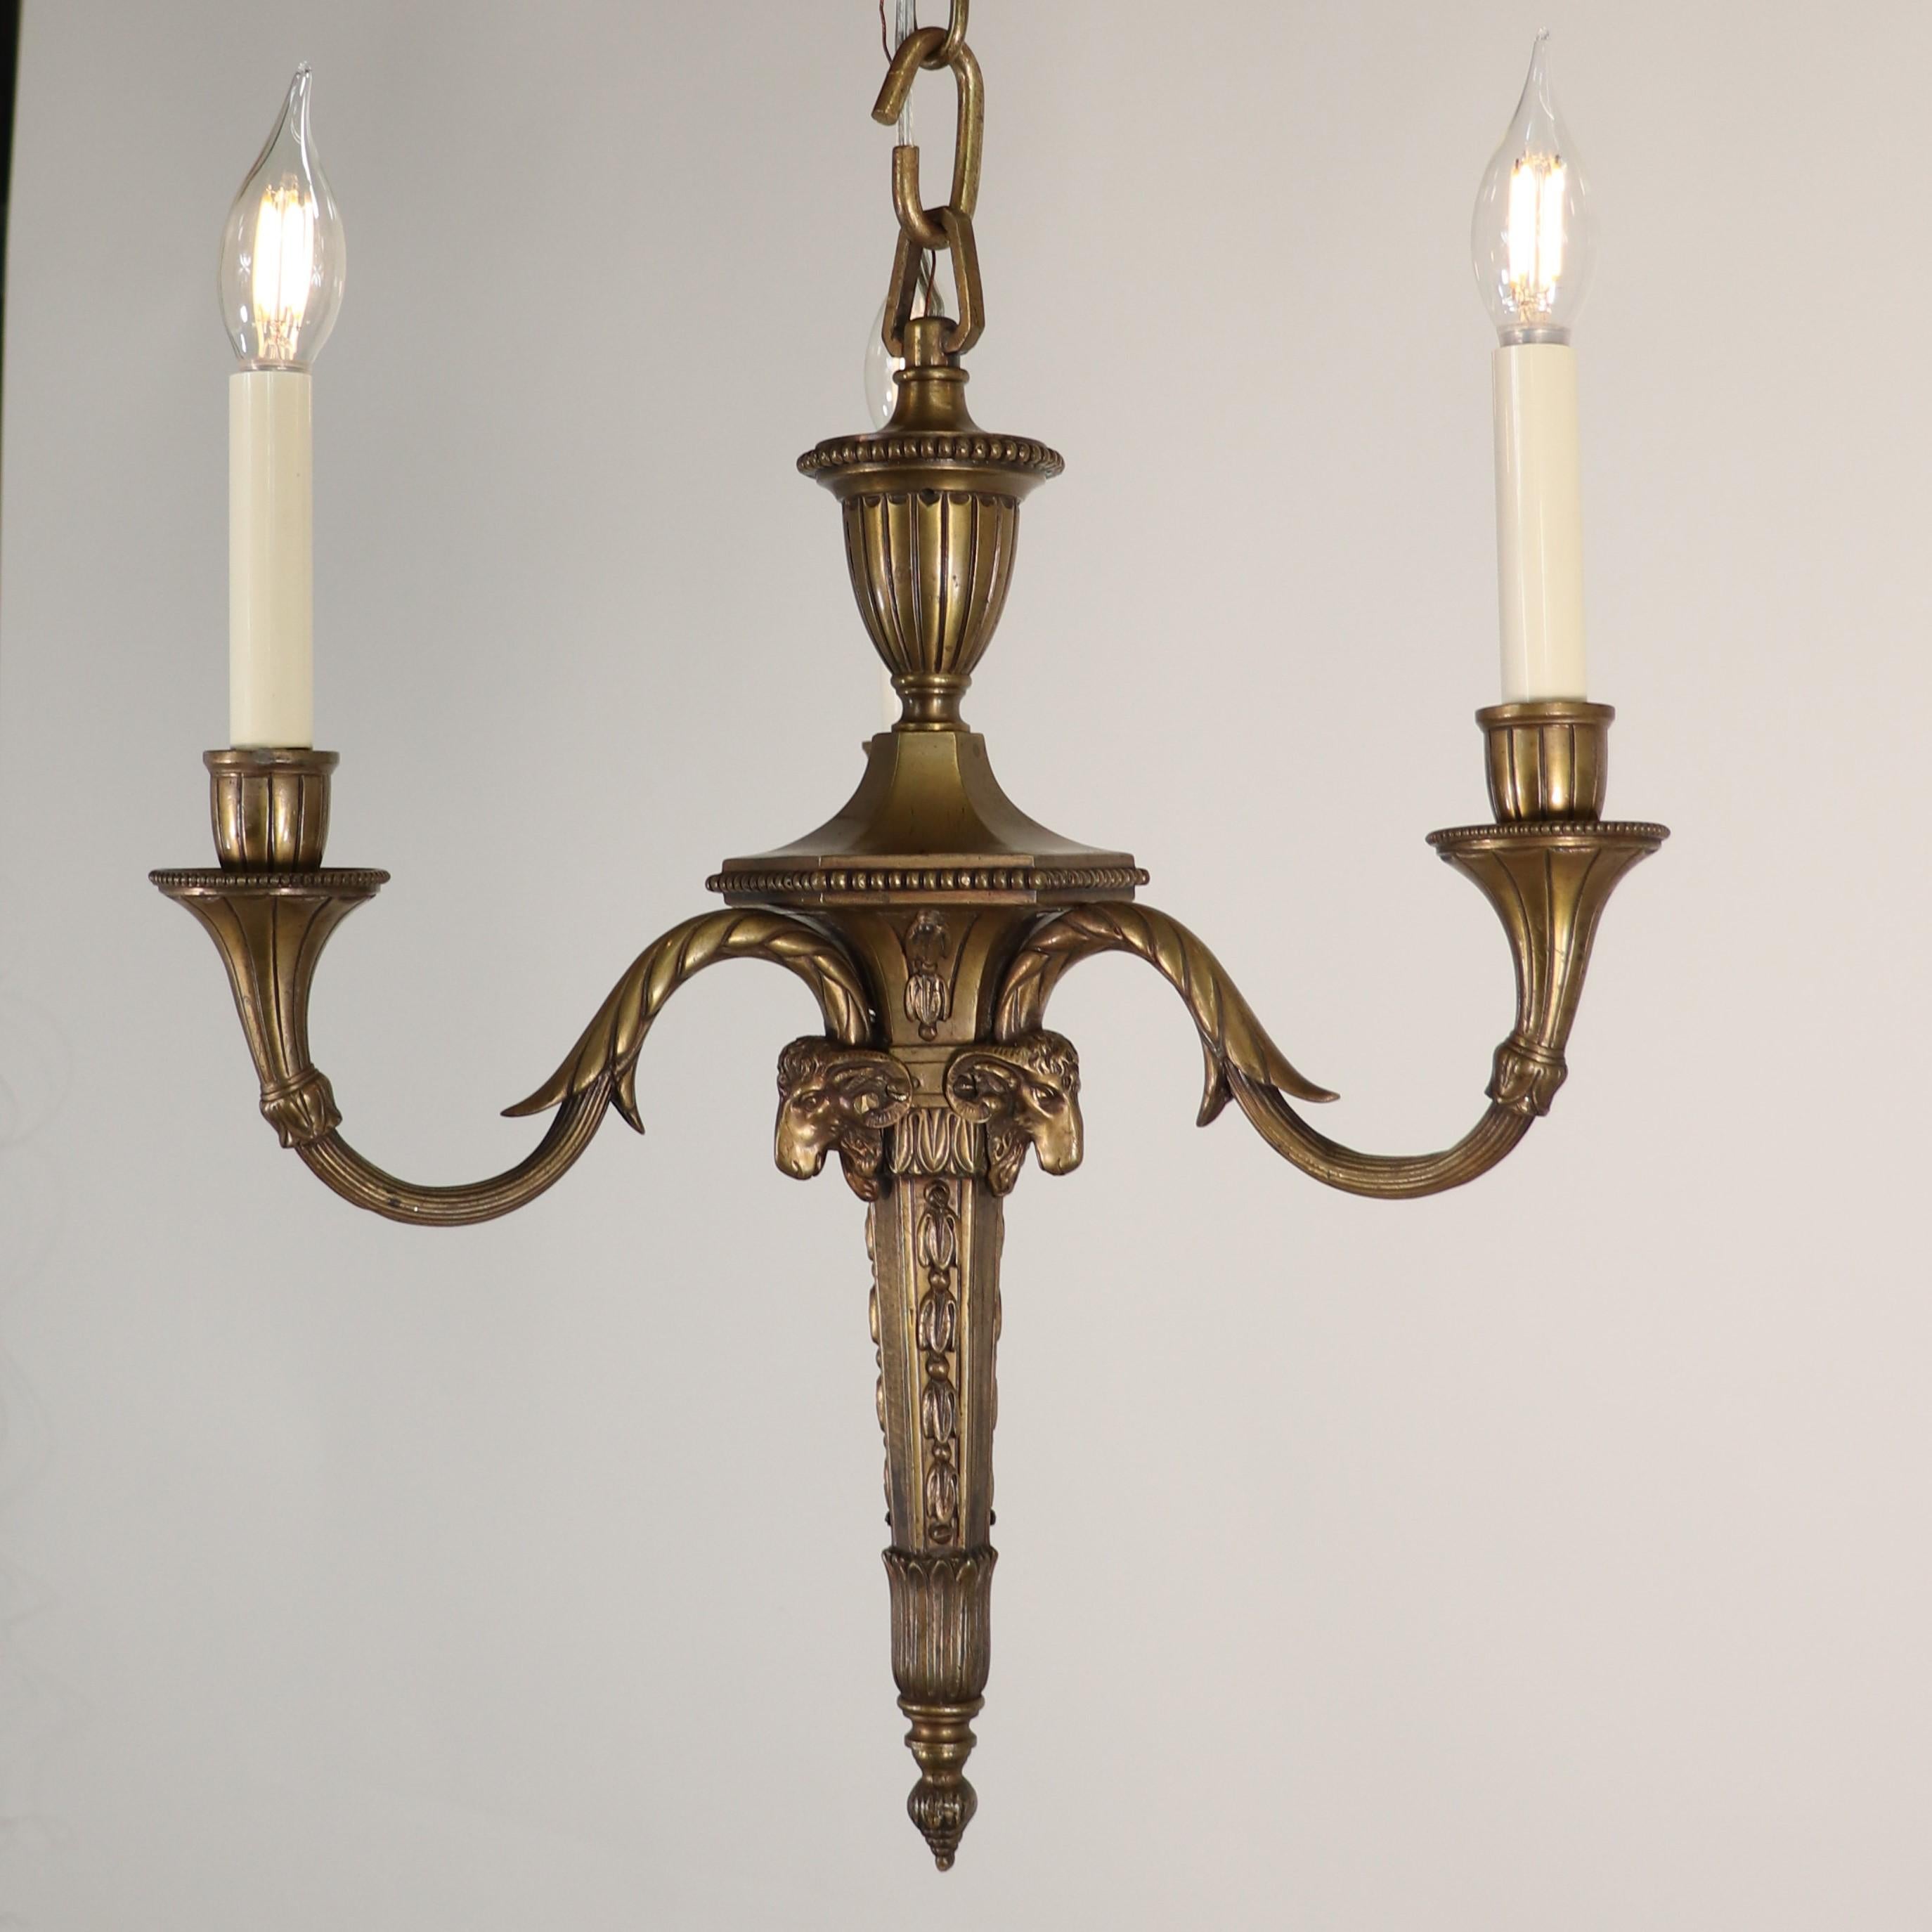 19th Century French Louis XVI Style Neoclassical Bronze Flambeau Chandelier In Good Condition For Sale In Chicago, IL